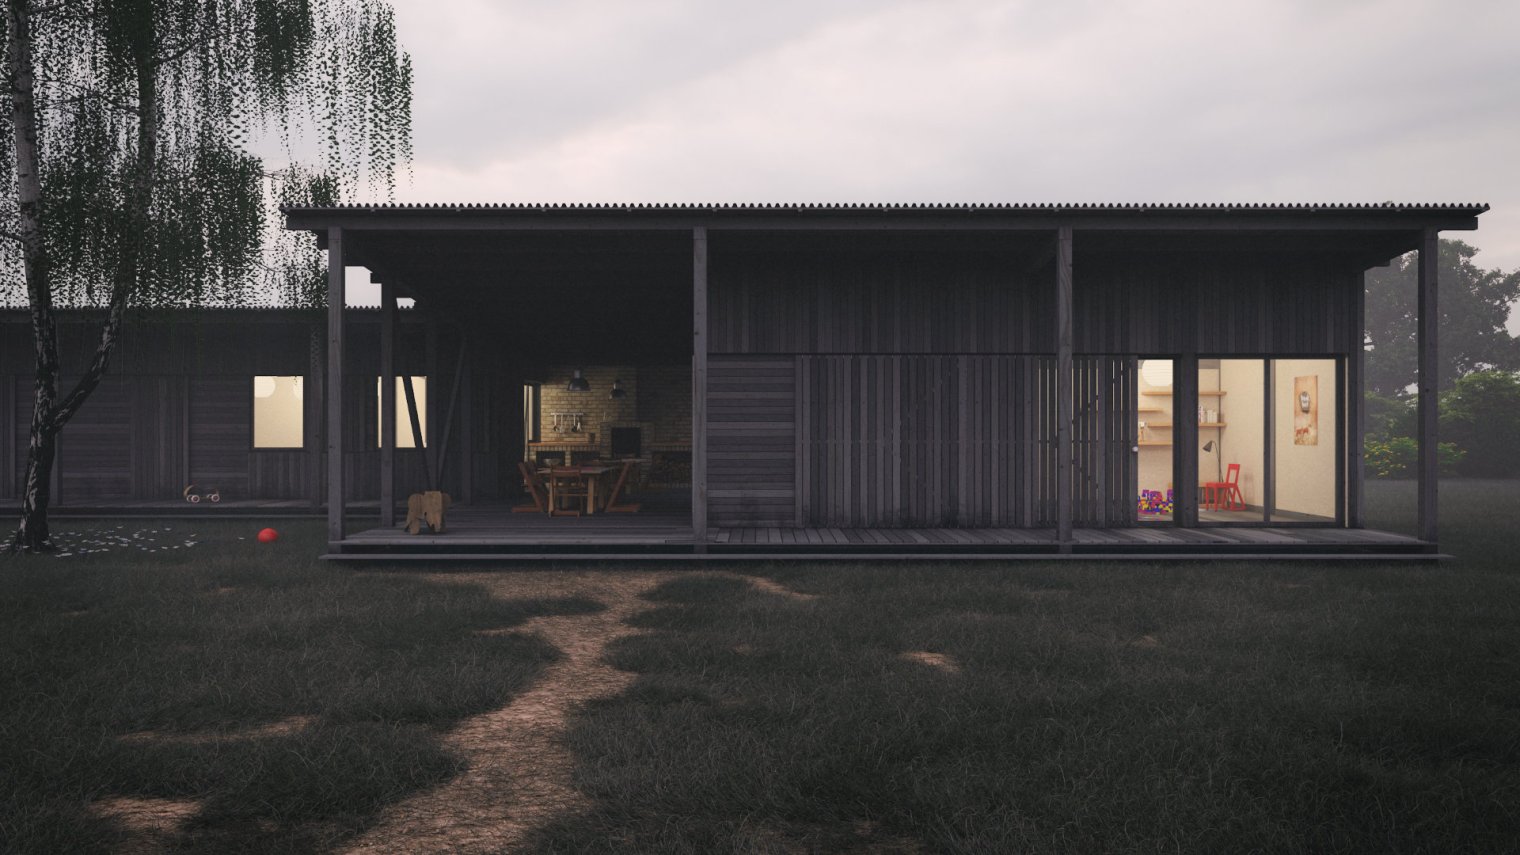 Clubhouse for therapeutic horse riding center visualization I made in 3ds Max